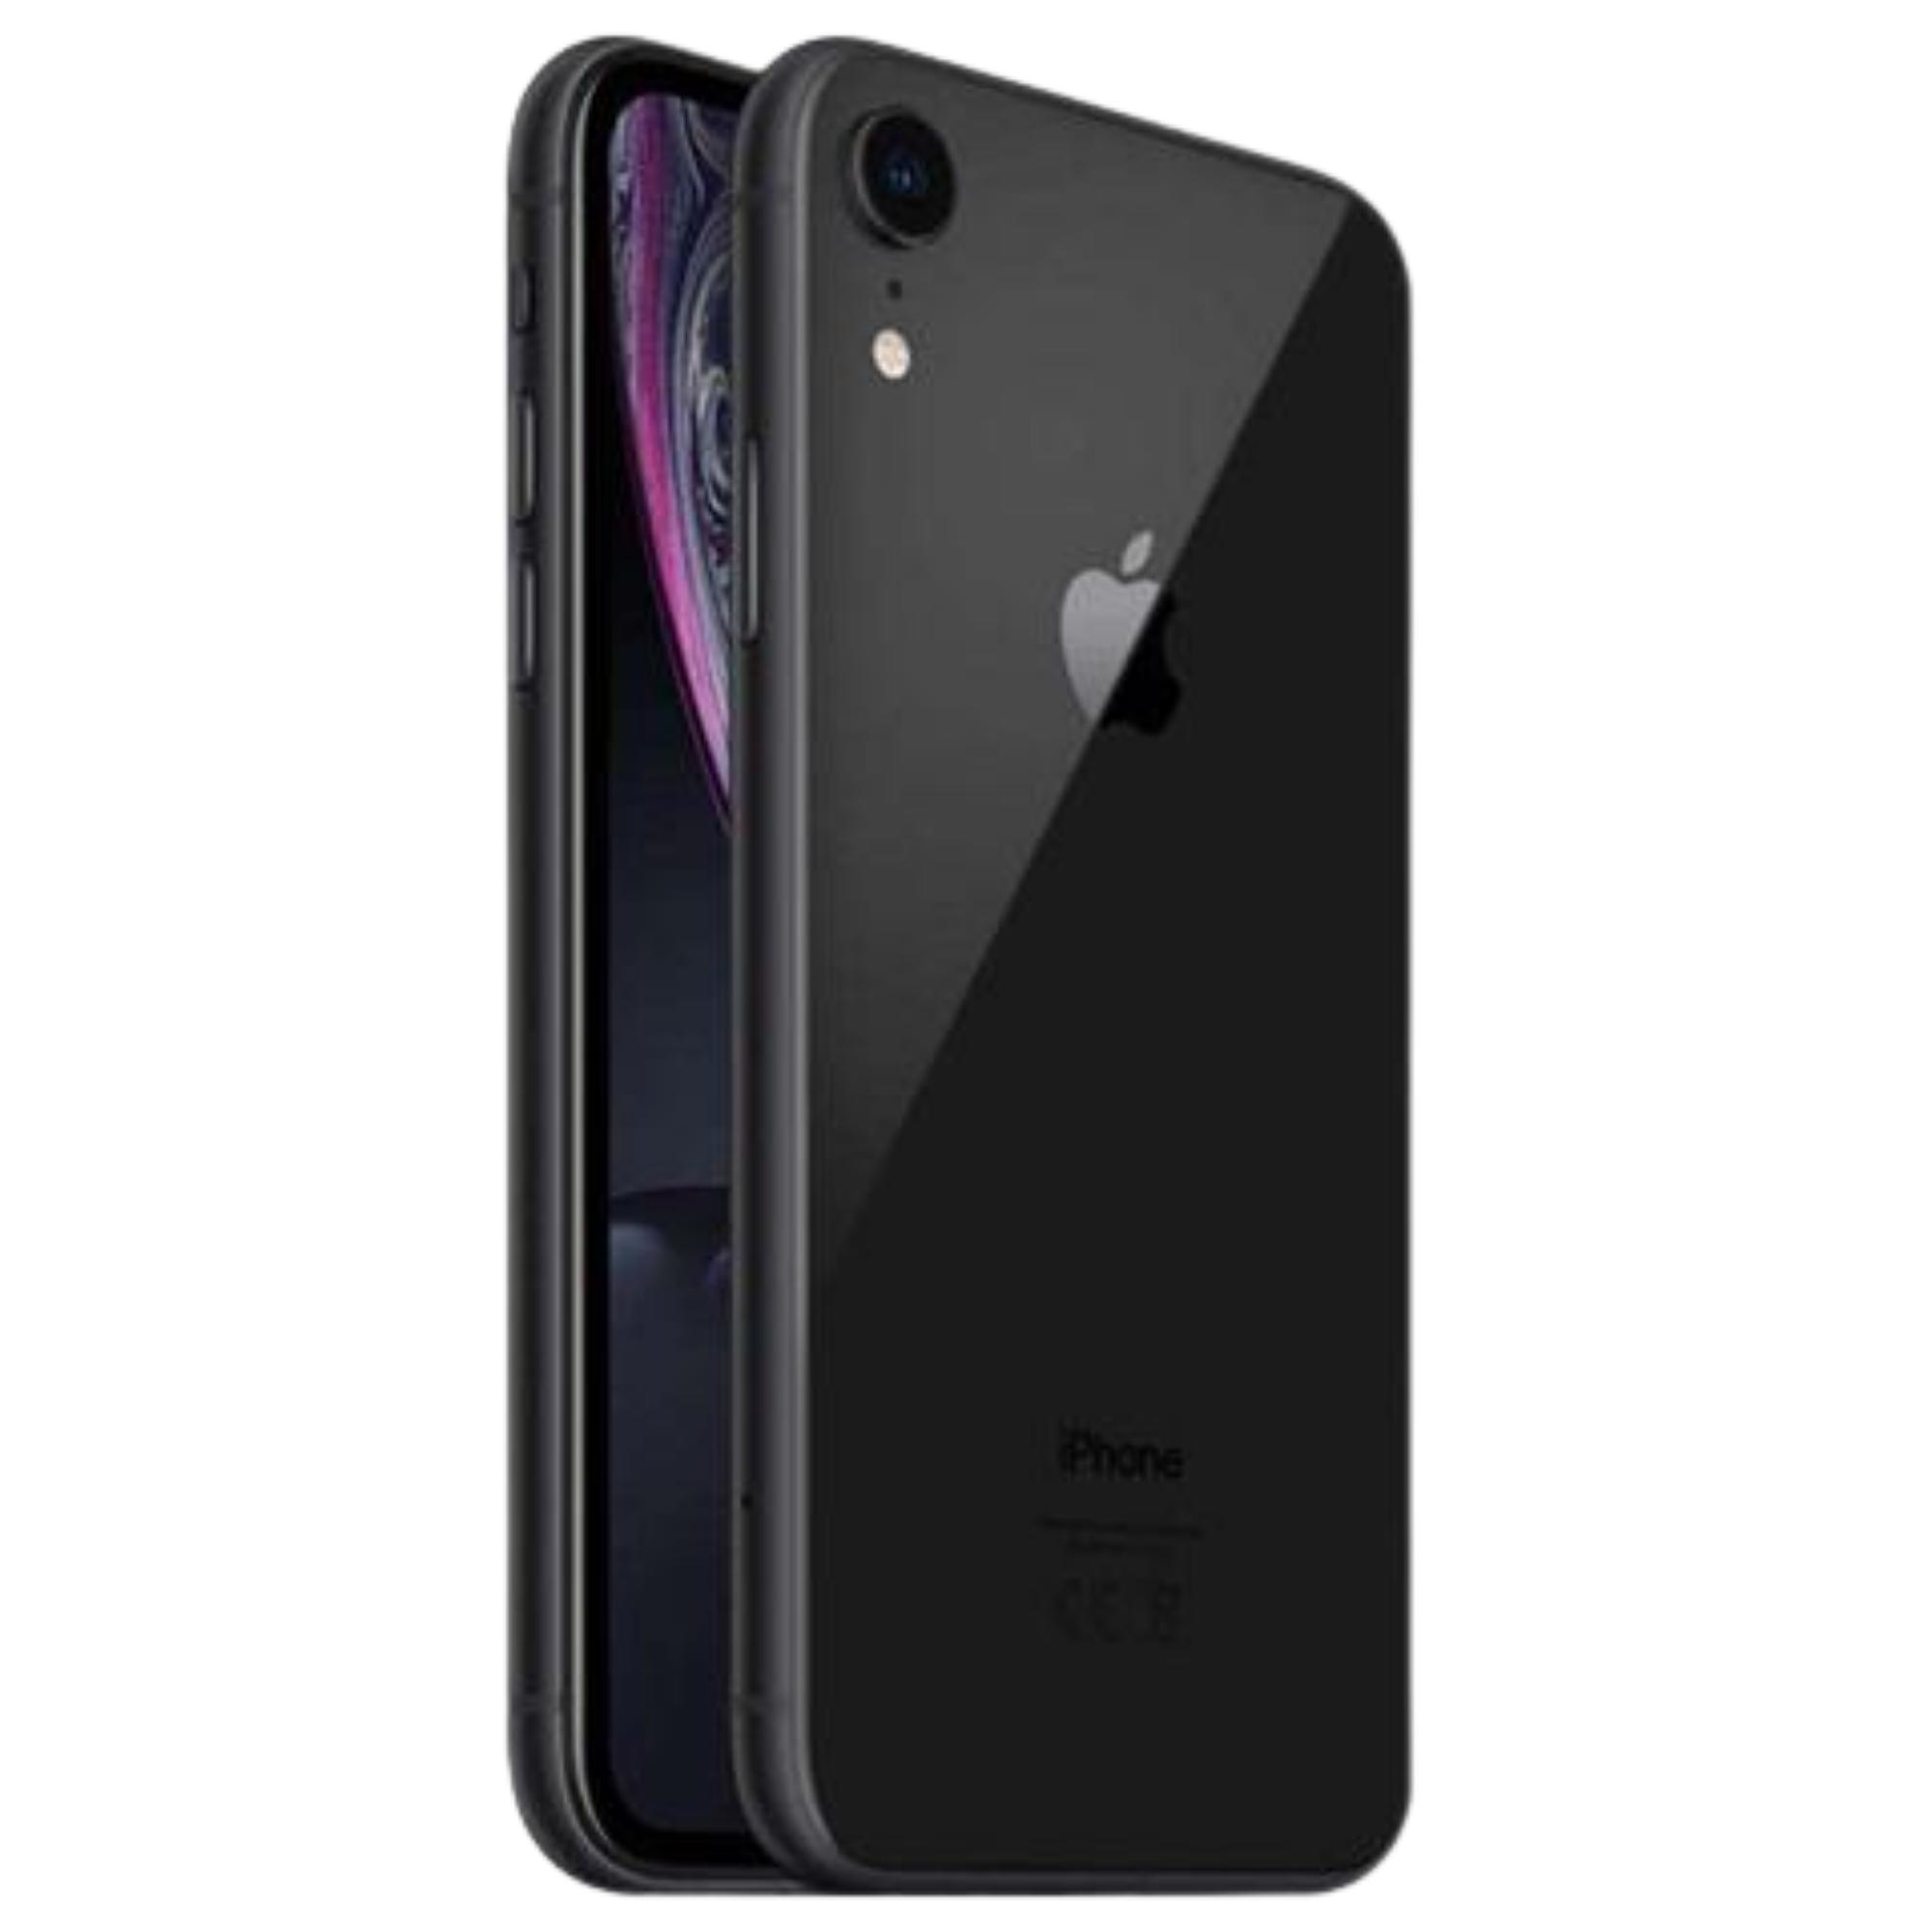 SmartPhone – APPLE IPHONE XR / 64GB  / 6.1″ / 12MPX / NERO / OTTIMO – APPIPXR64N-O<br><br><span STYLE="background:#39ac37;"><font color="white"> DISPONIBILE </font></span>